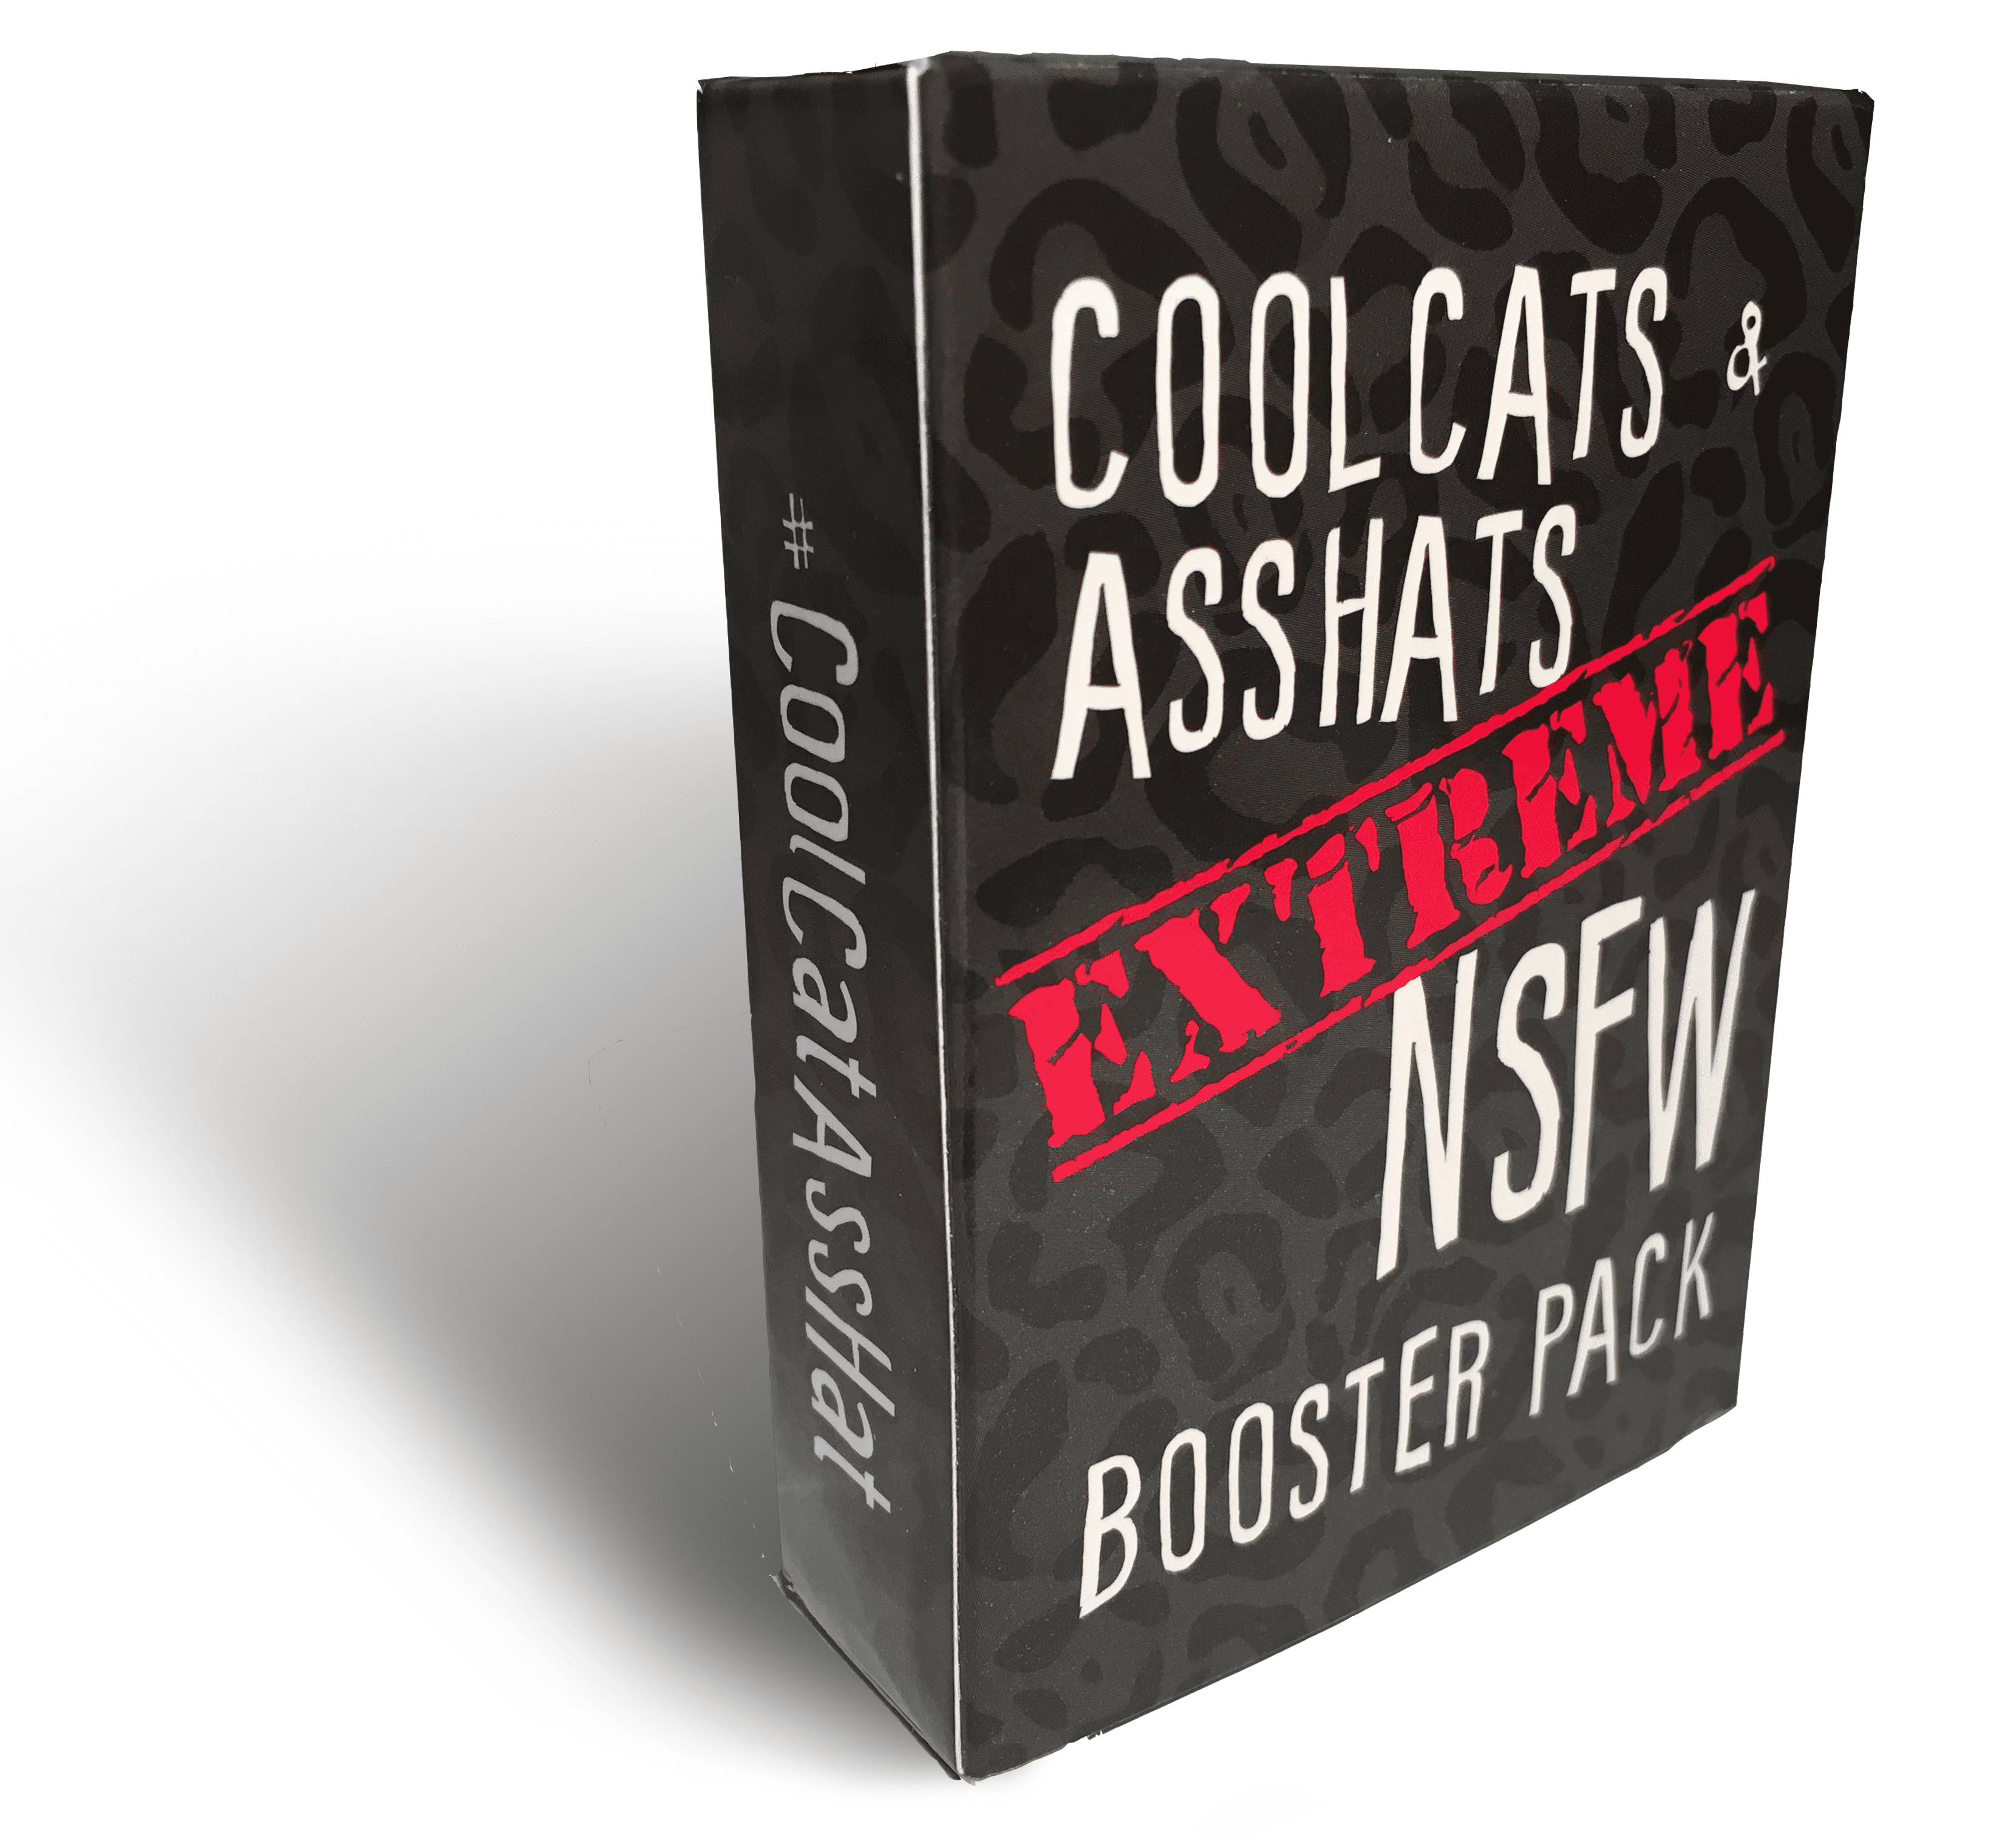 CoolCats & AssHats: Extreme NSFW Booster Pack